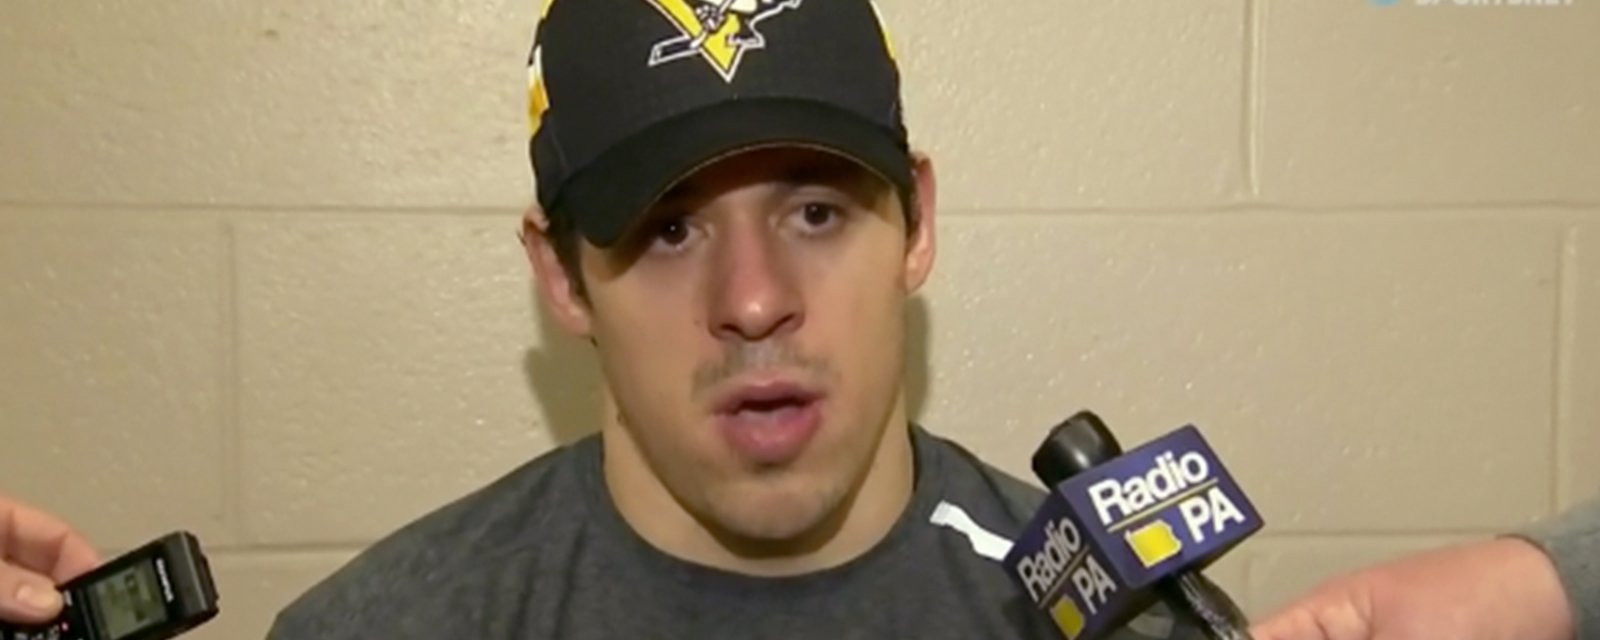 Flyers fans outraged over Malkin’s defense of vicious stick swinging incident